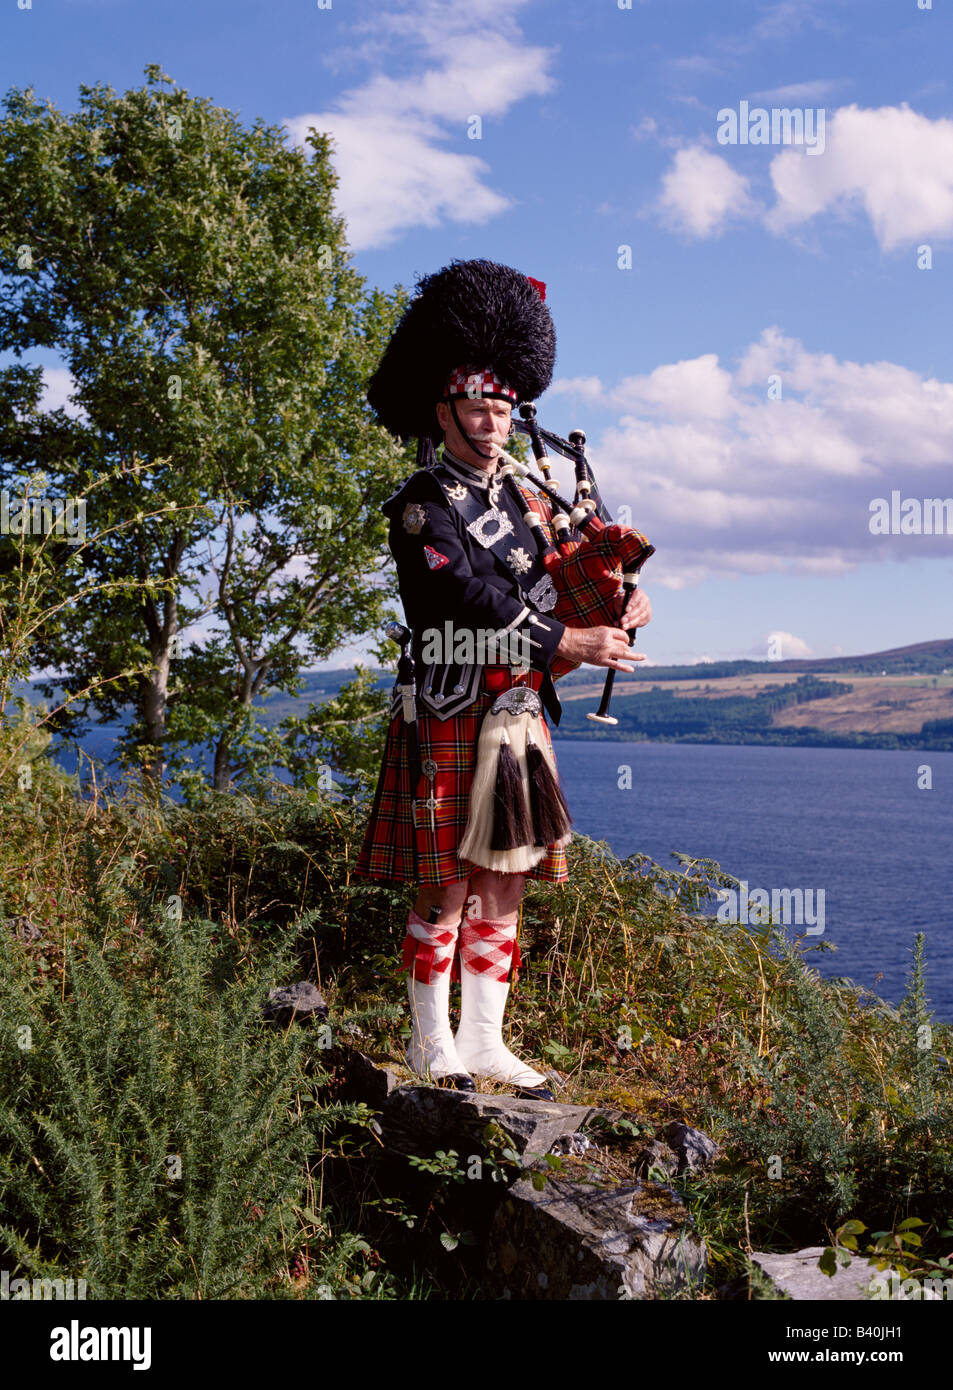 dh  SCOTTISH PIPER SCOTLAND Bagpipes tartan kilt bagpipe in highlands bag pipes player bagpiper traditional highland dress male loch ness Stock Photo